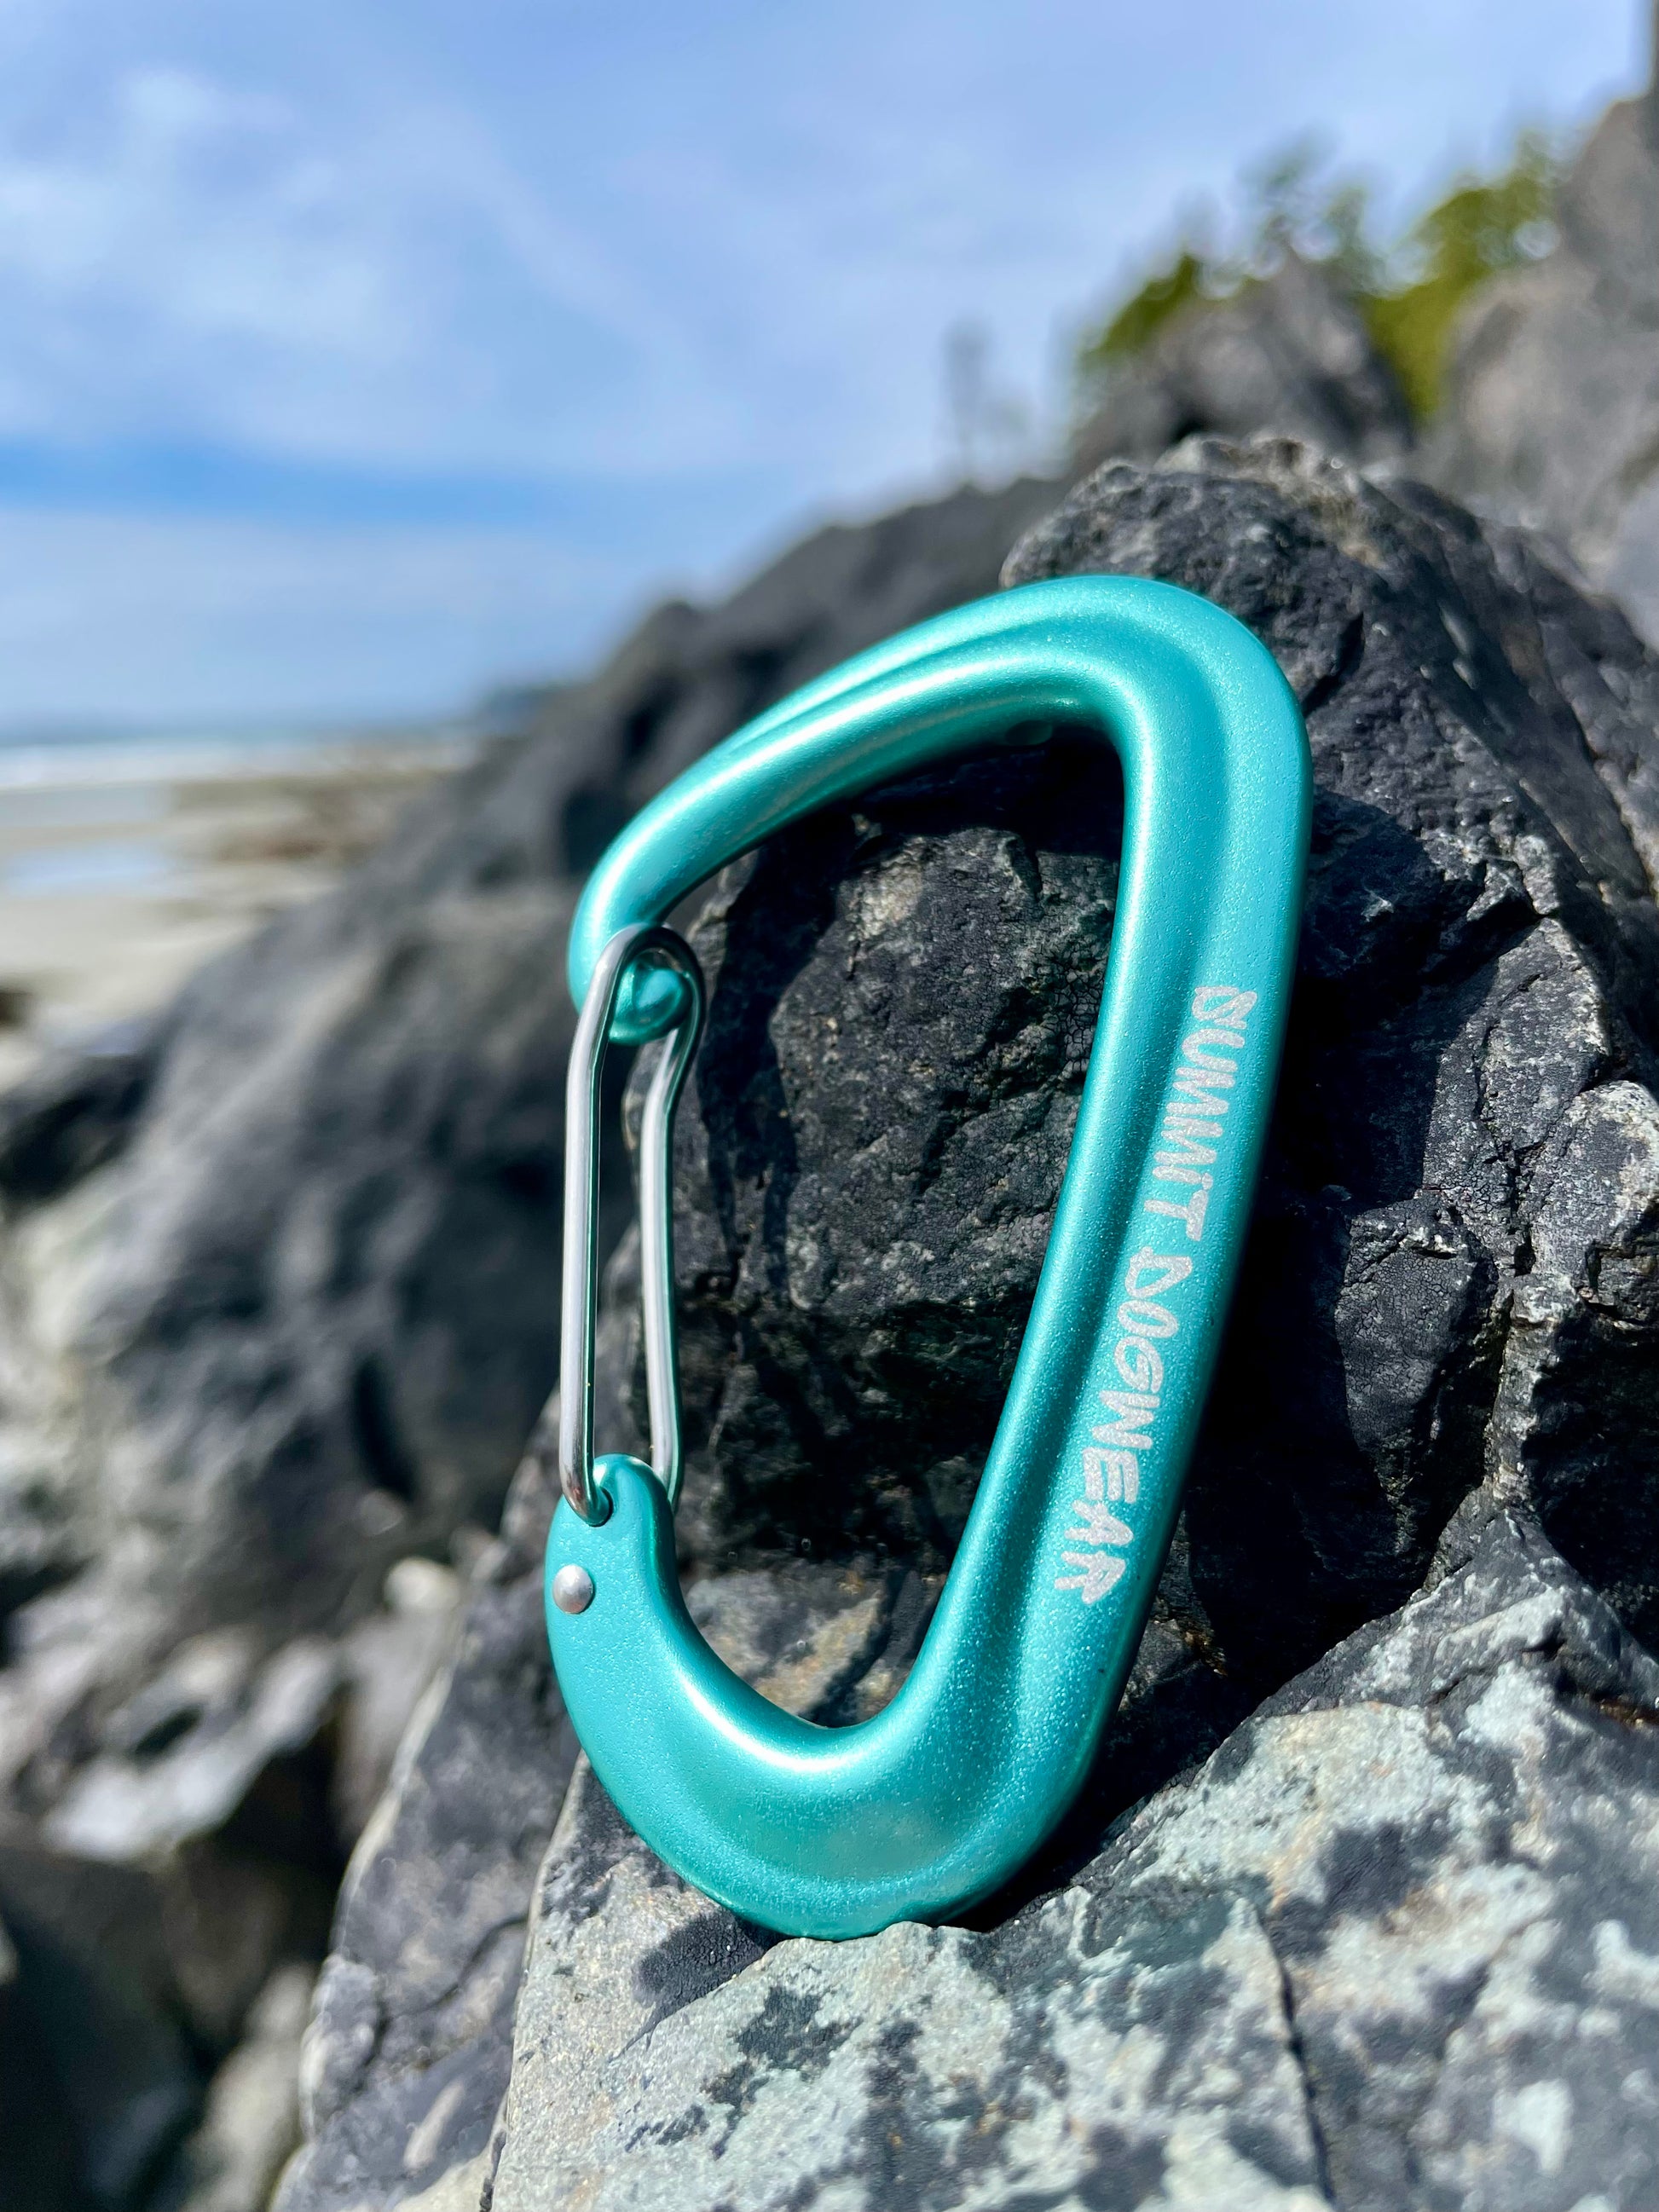 Carabiner clip for leashes to be in teal